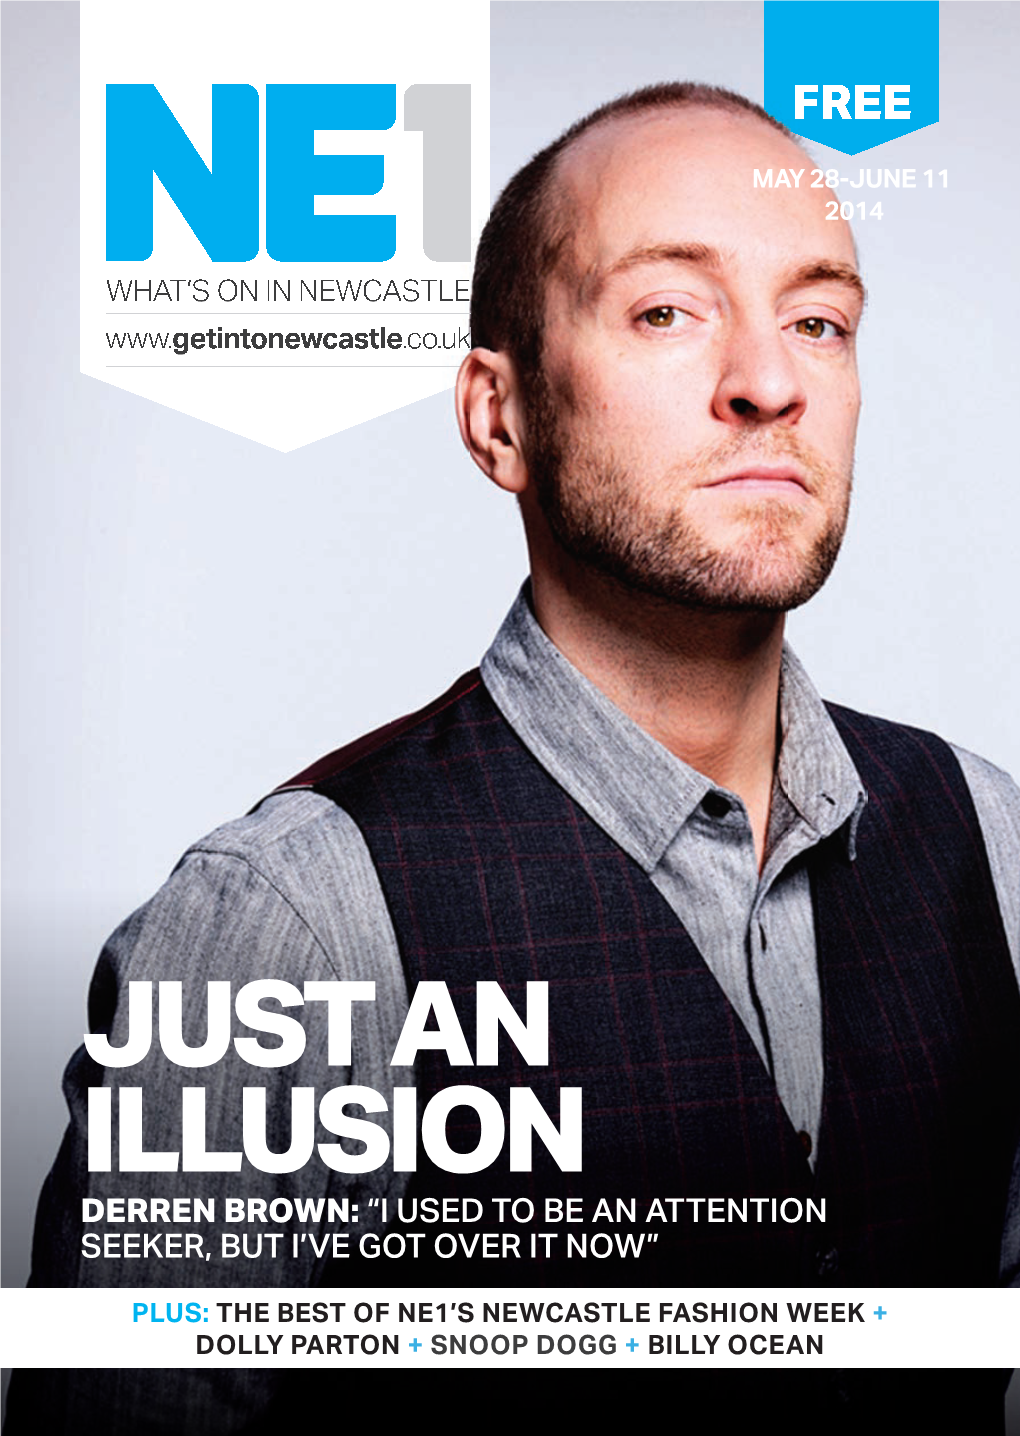 Just an Illusion Derren Brown: “I Used to Be an Attention Seeker, but I’Ve Got Over It Now”